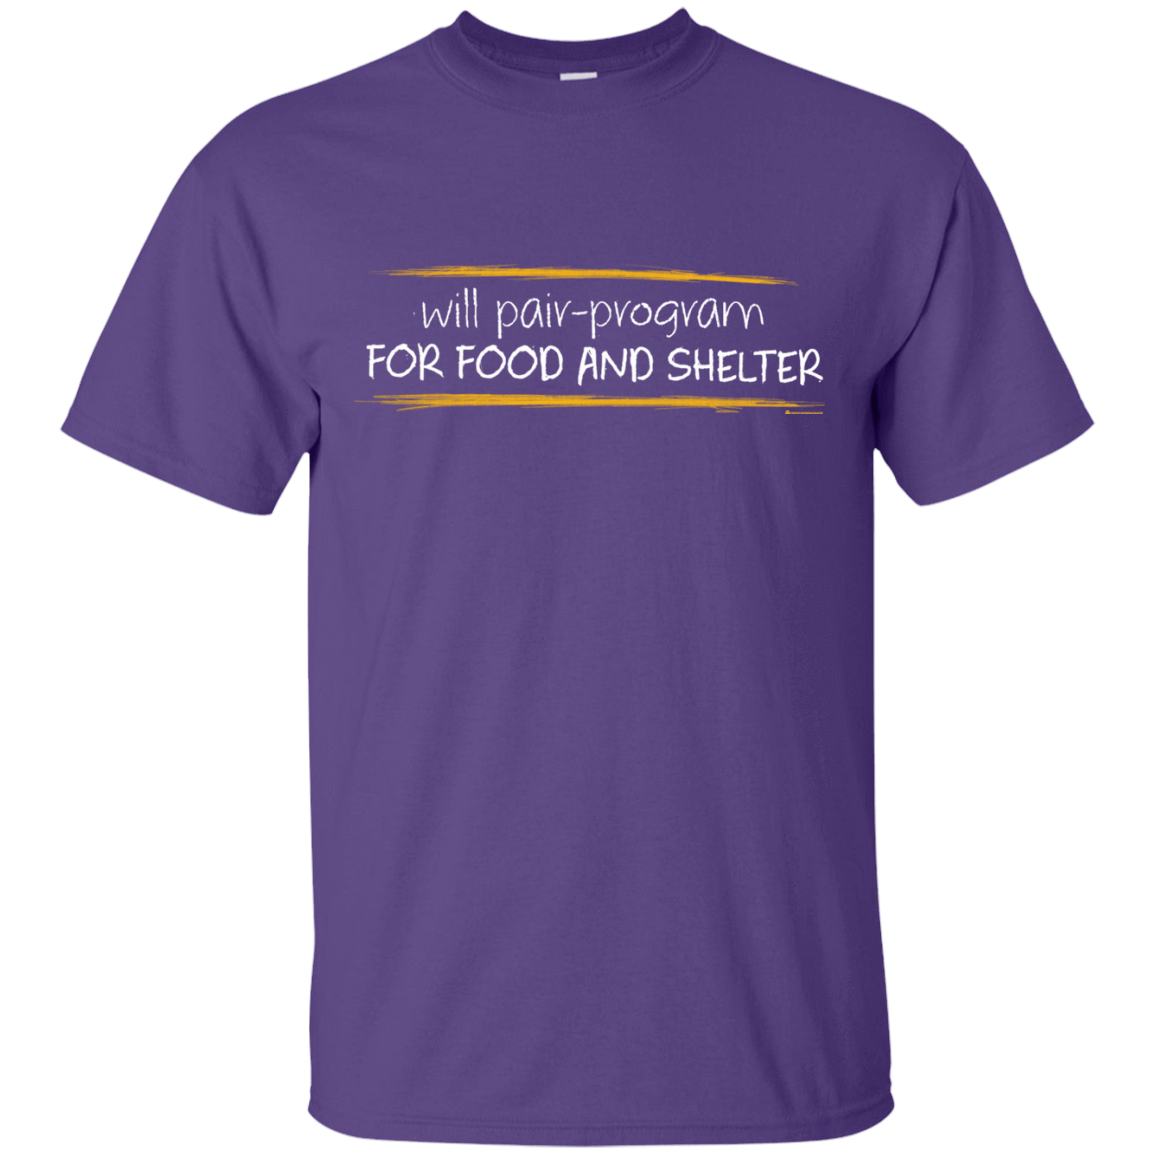 T-Shirts Purple / Small Pair Programming For Food And Shelter T-Shirt